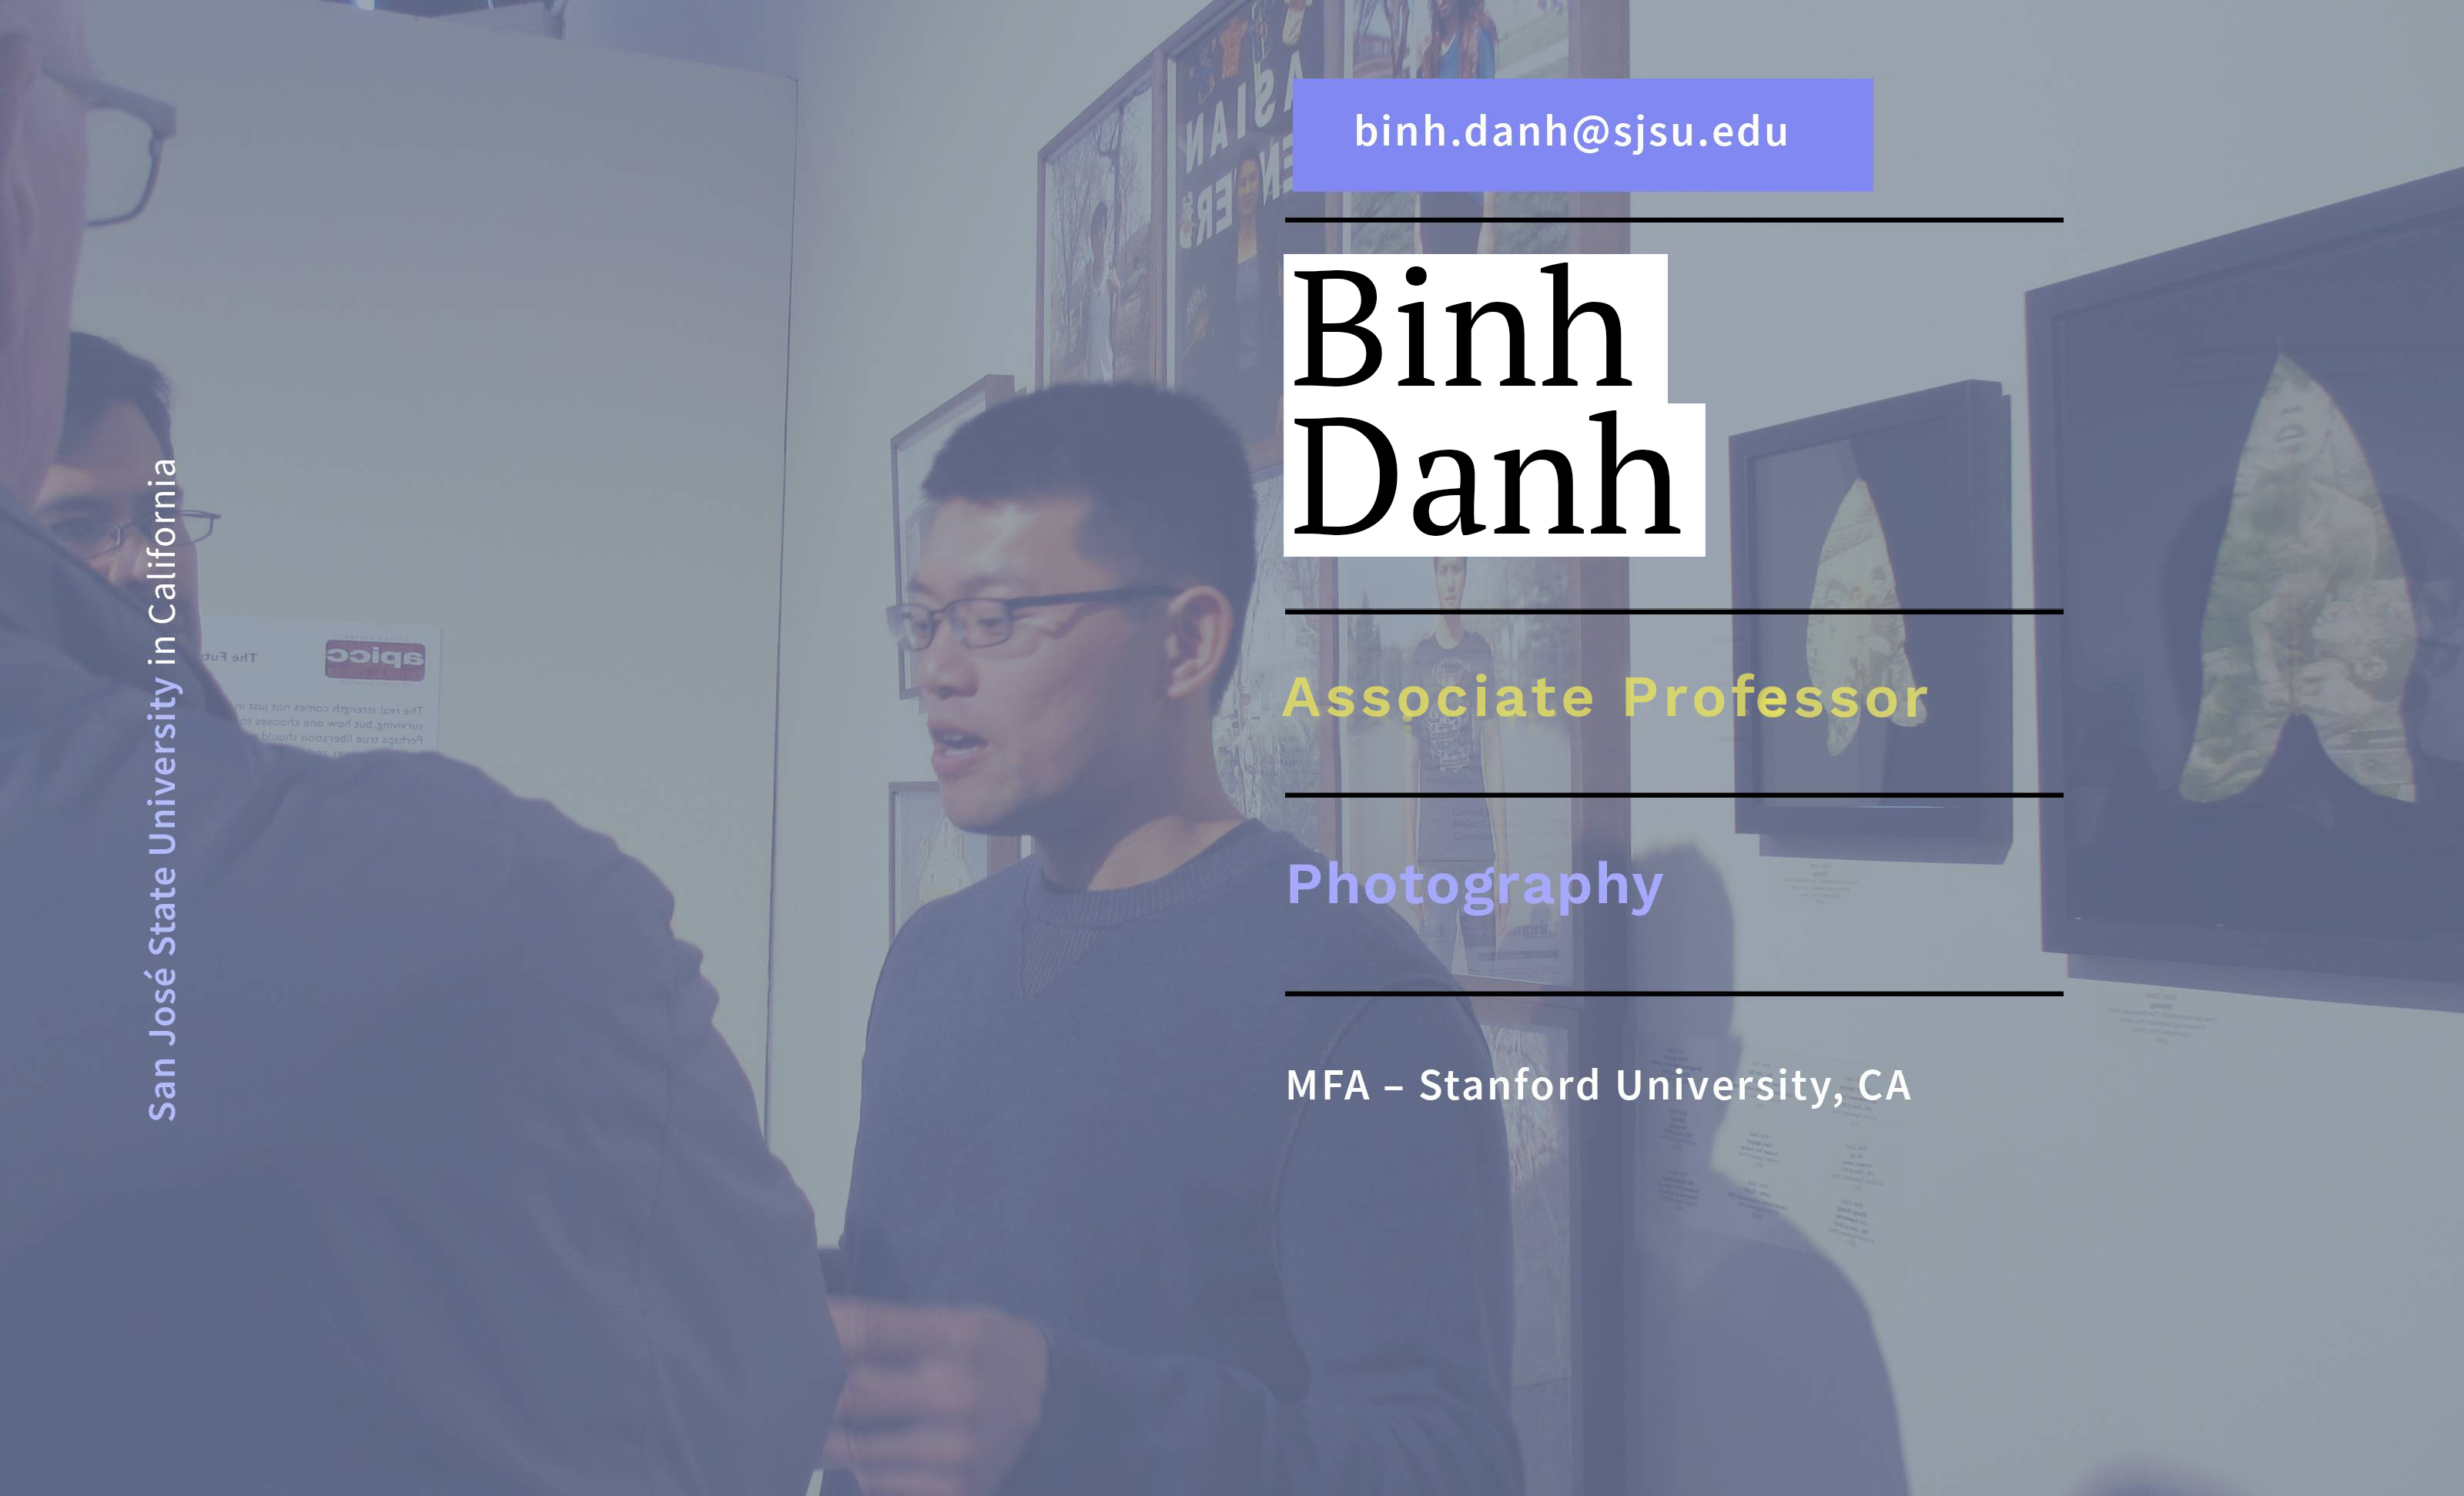 Faculty photo card of Binh Danh at an art exhibition